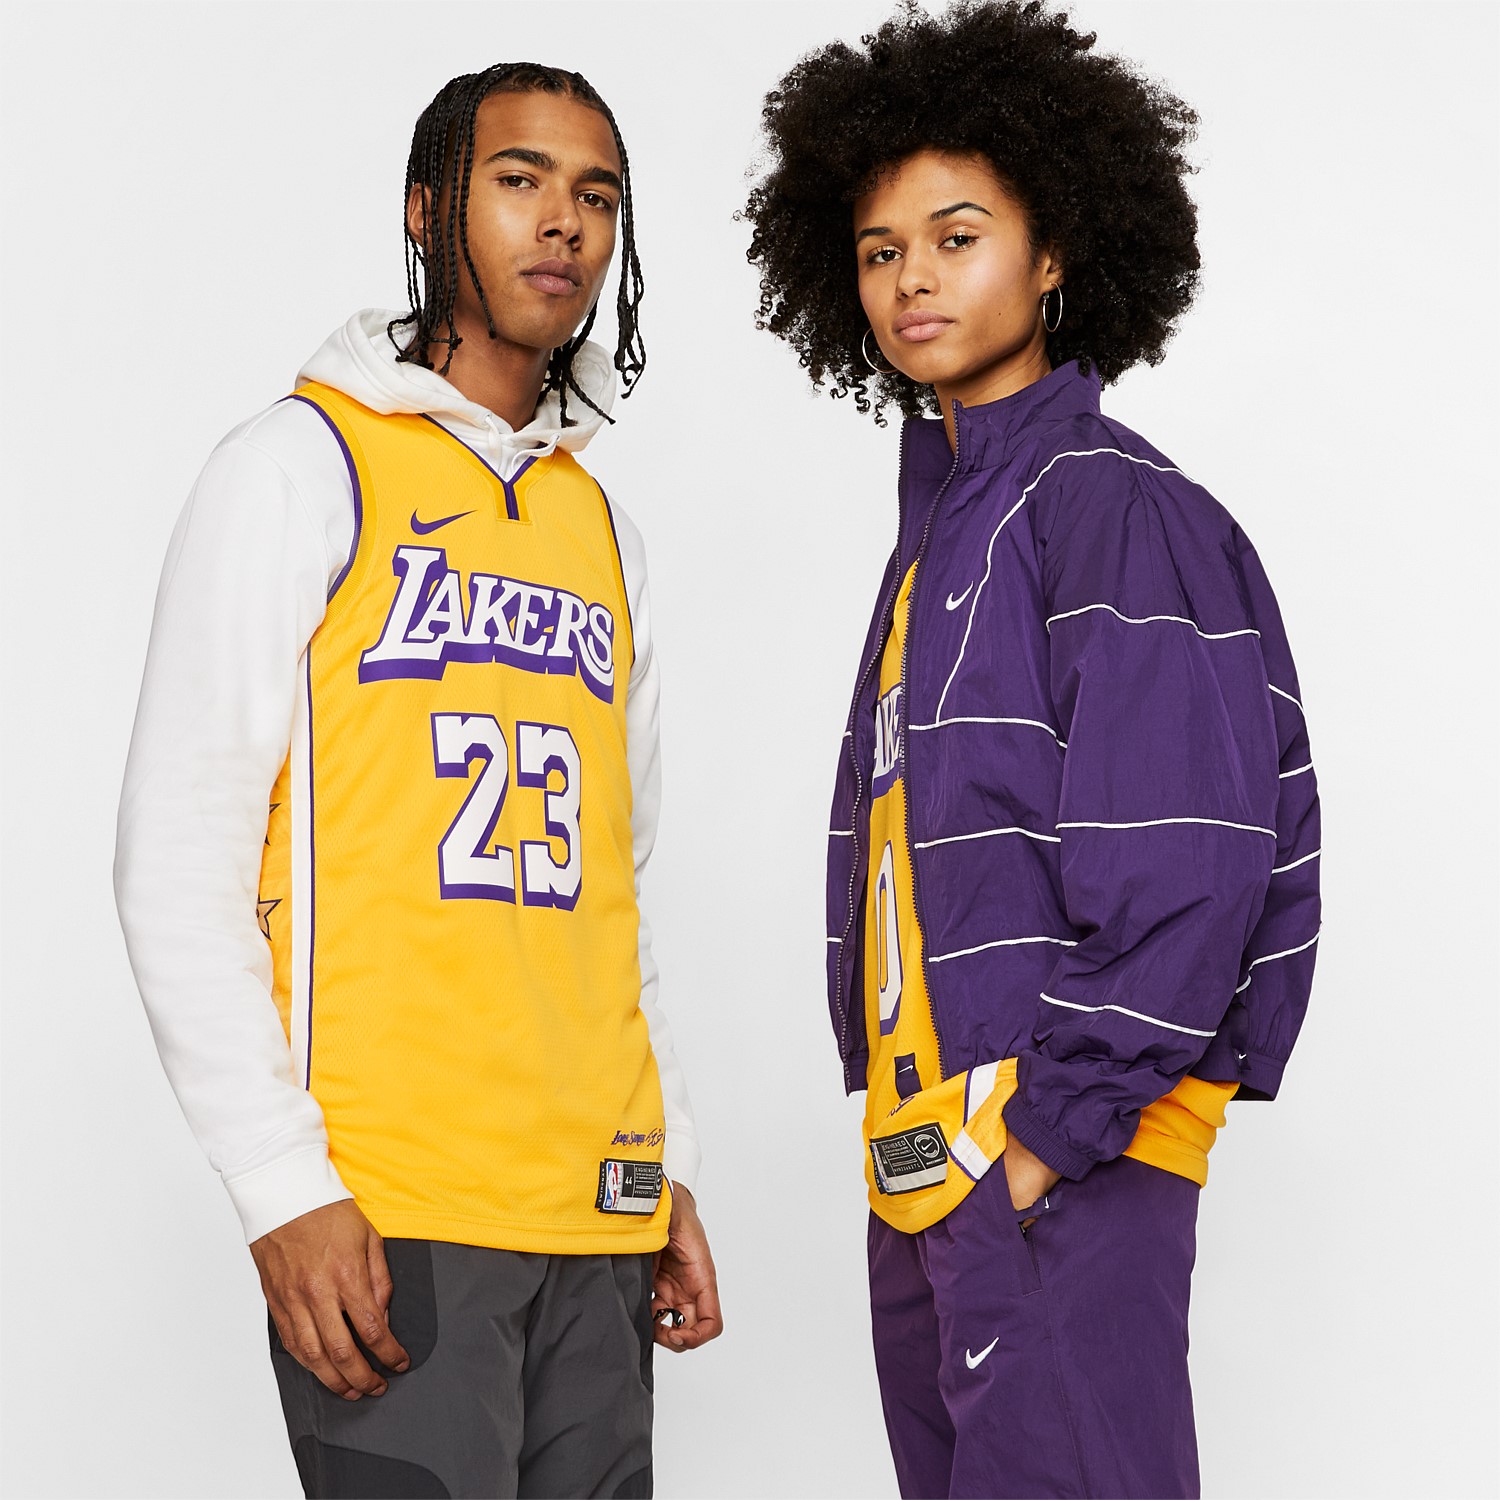 New Arrivals for Men's, Women's and Kid's  Stirling Sports - Los Angeles Lakers  City Edition - James